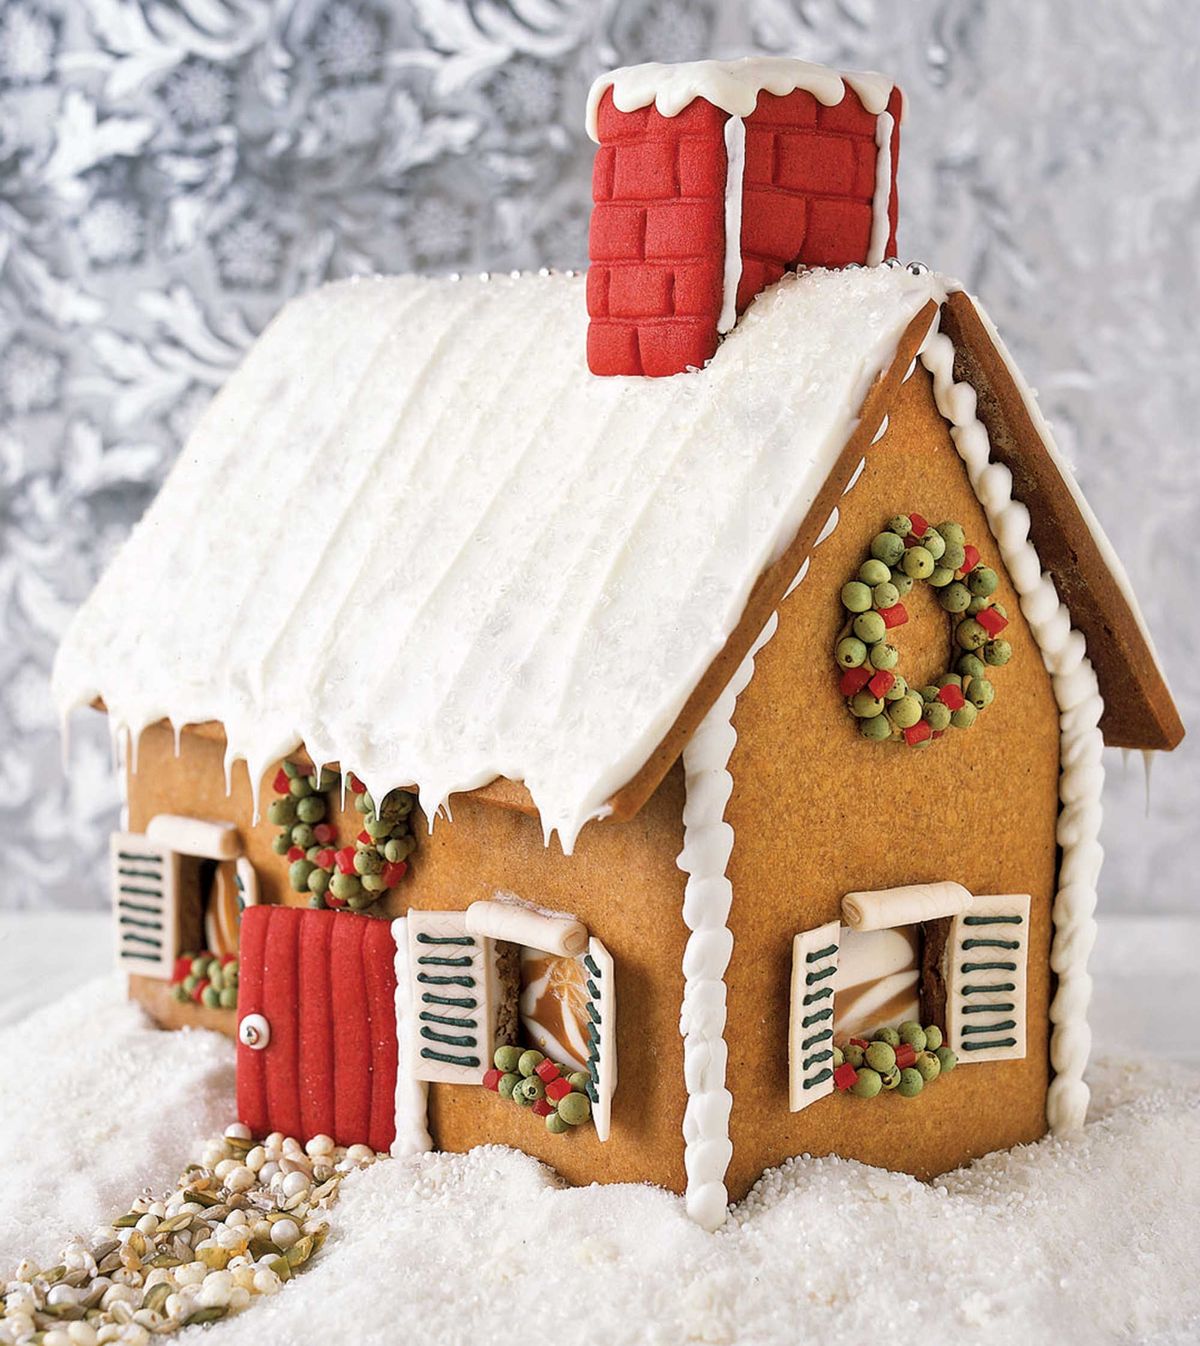 gingerbread house, gingerbread, food, house, dessert, winter, icing, snow, christmas decoration, home,